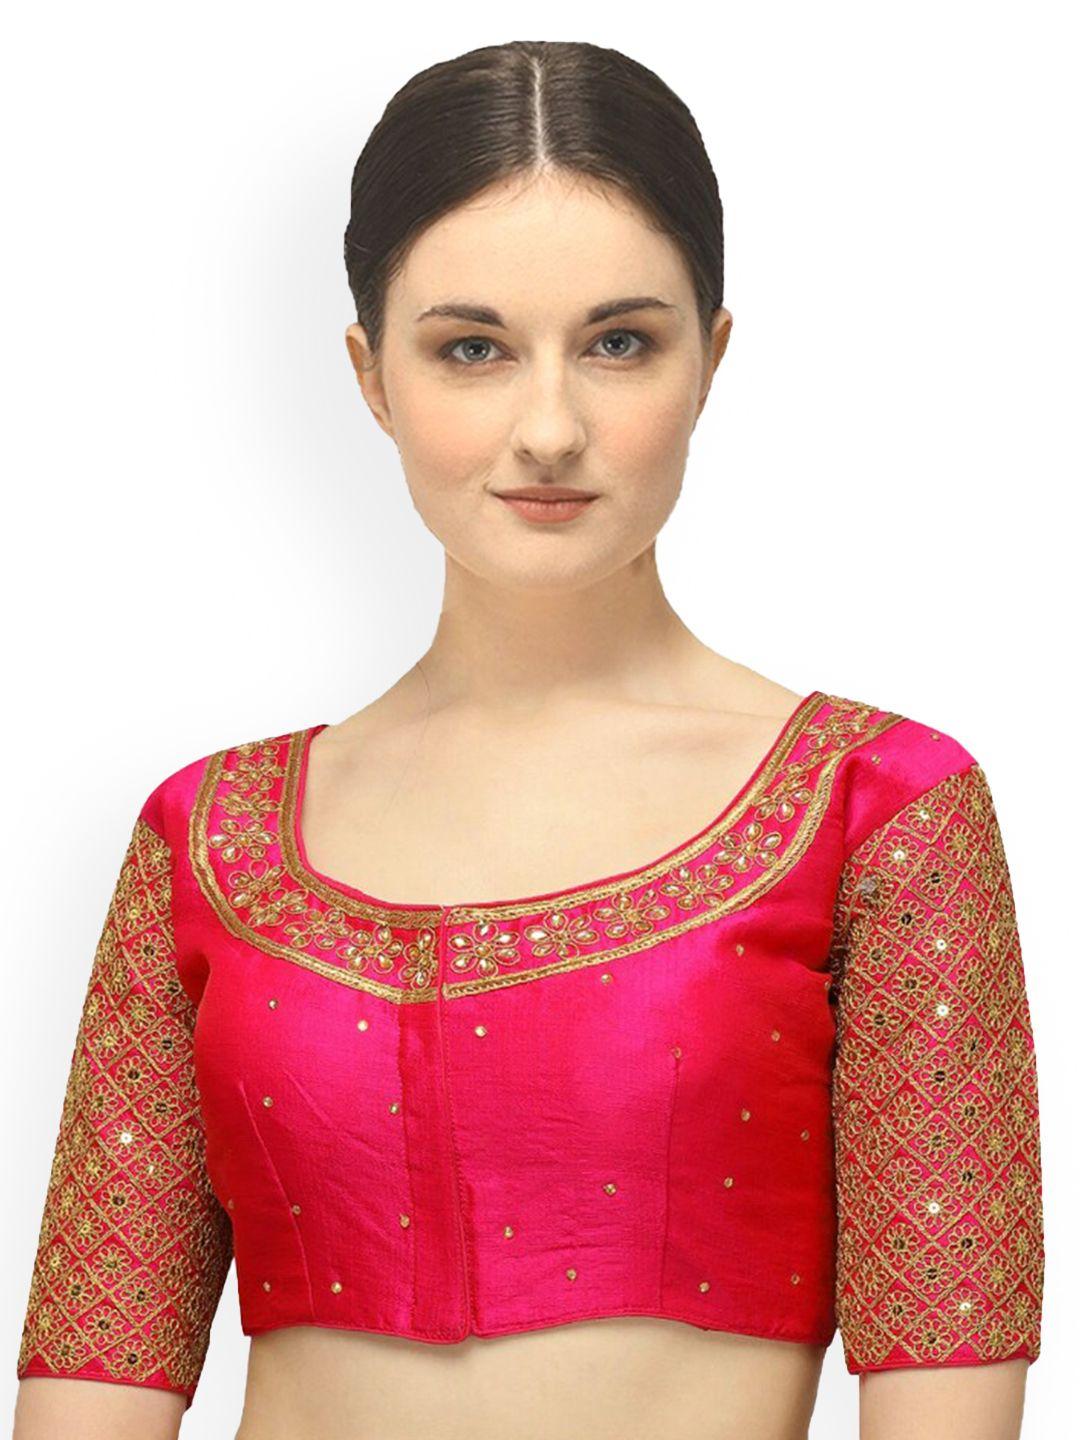 sumaira-tex-women-peach-colored-&-gold-colored-embroidered-readymade-saree-blouse